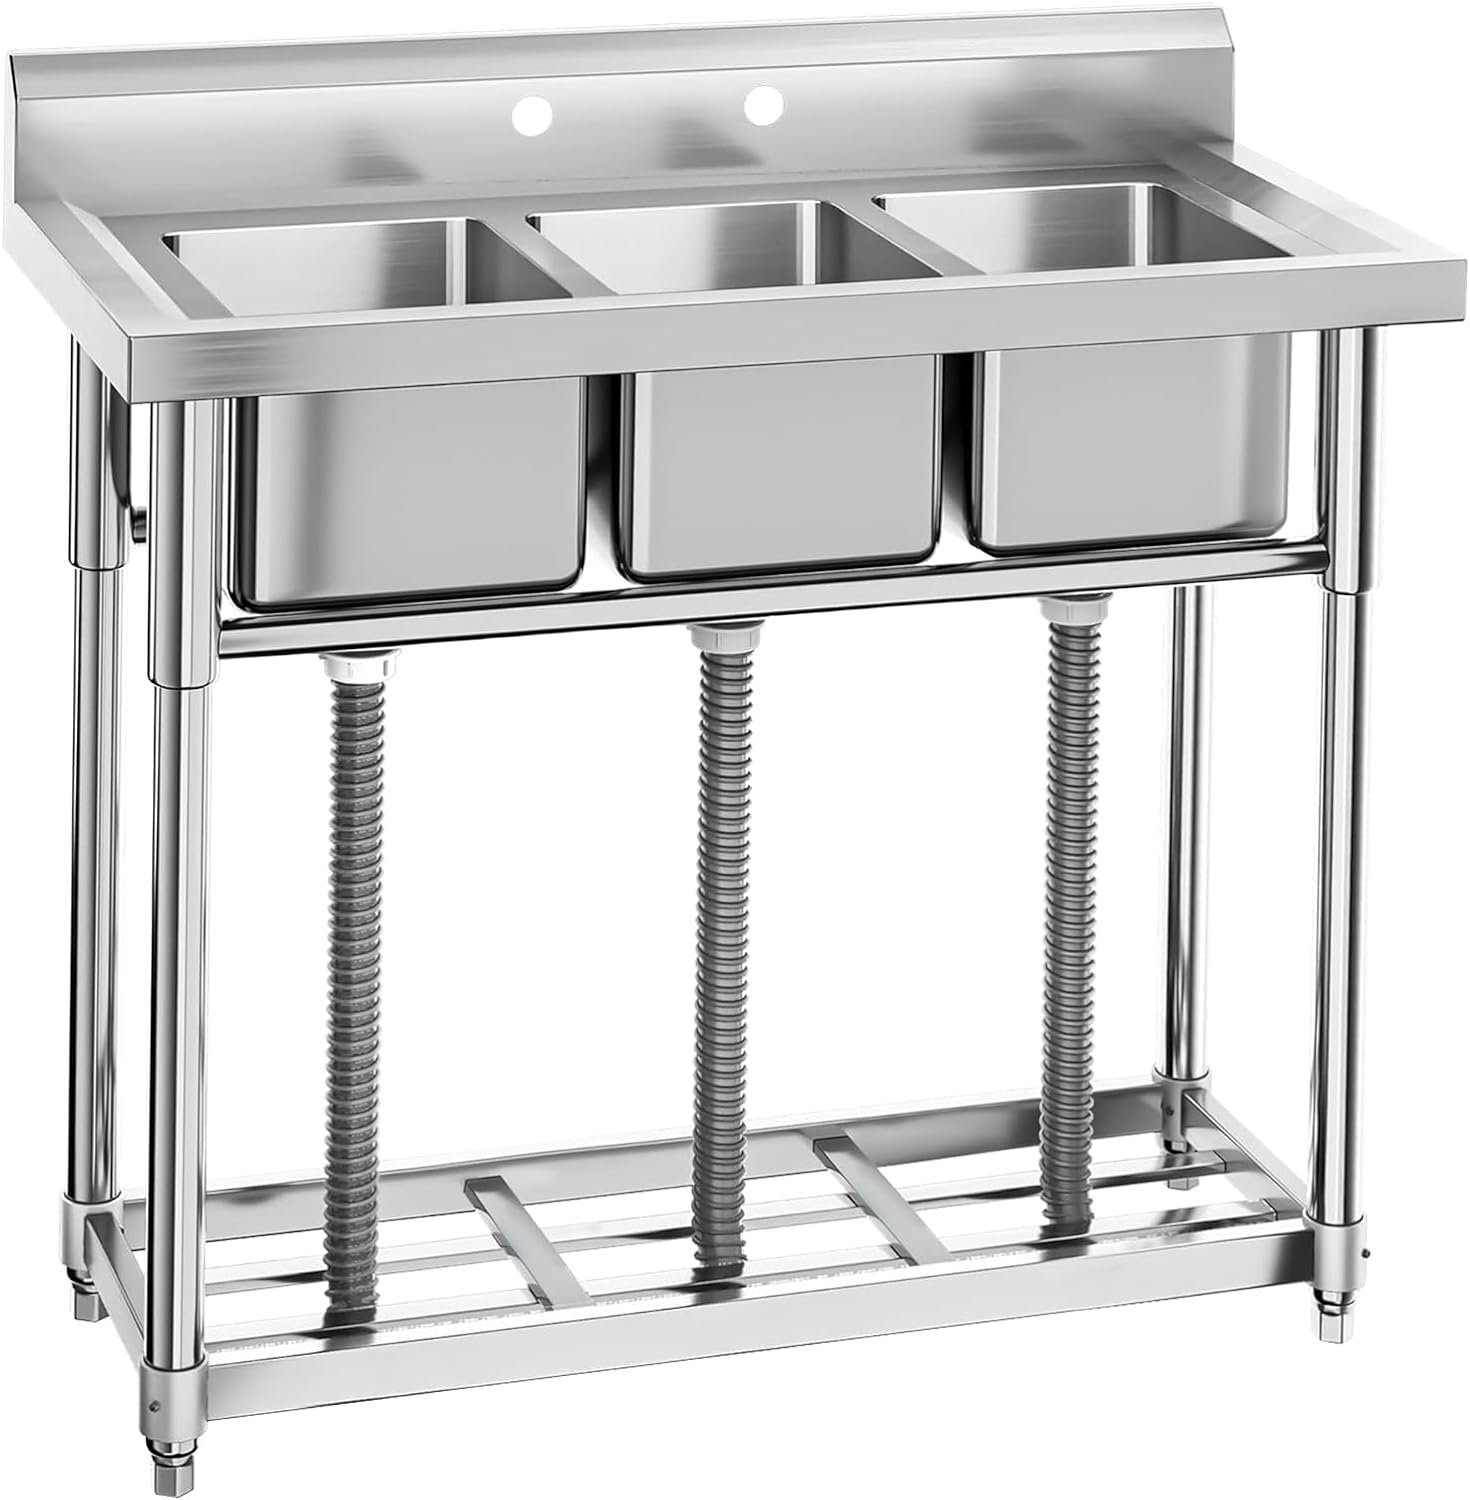 Fashionwu Stainless Steel Sink, Commercial Kitchen Prep & Utility Sink Free  Standing 3-compartment With Shelf